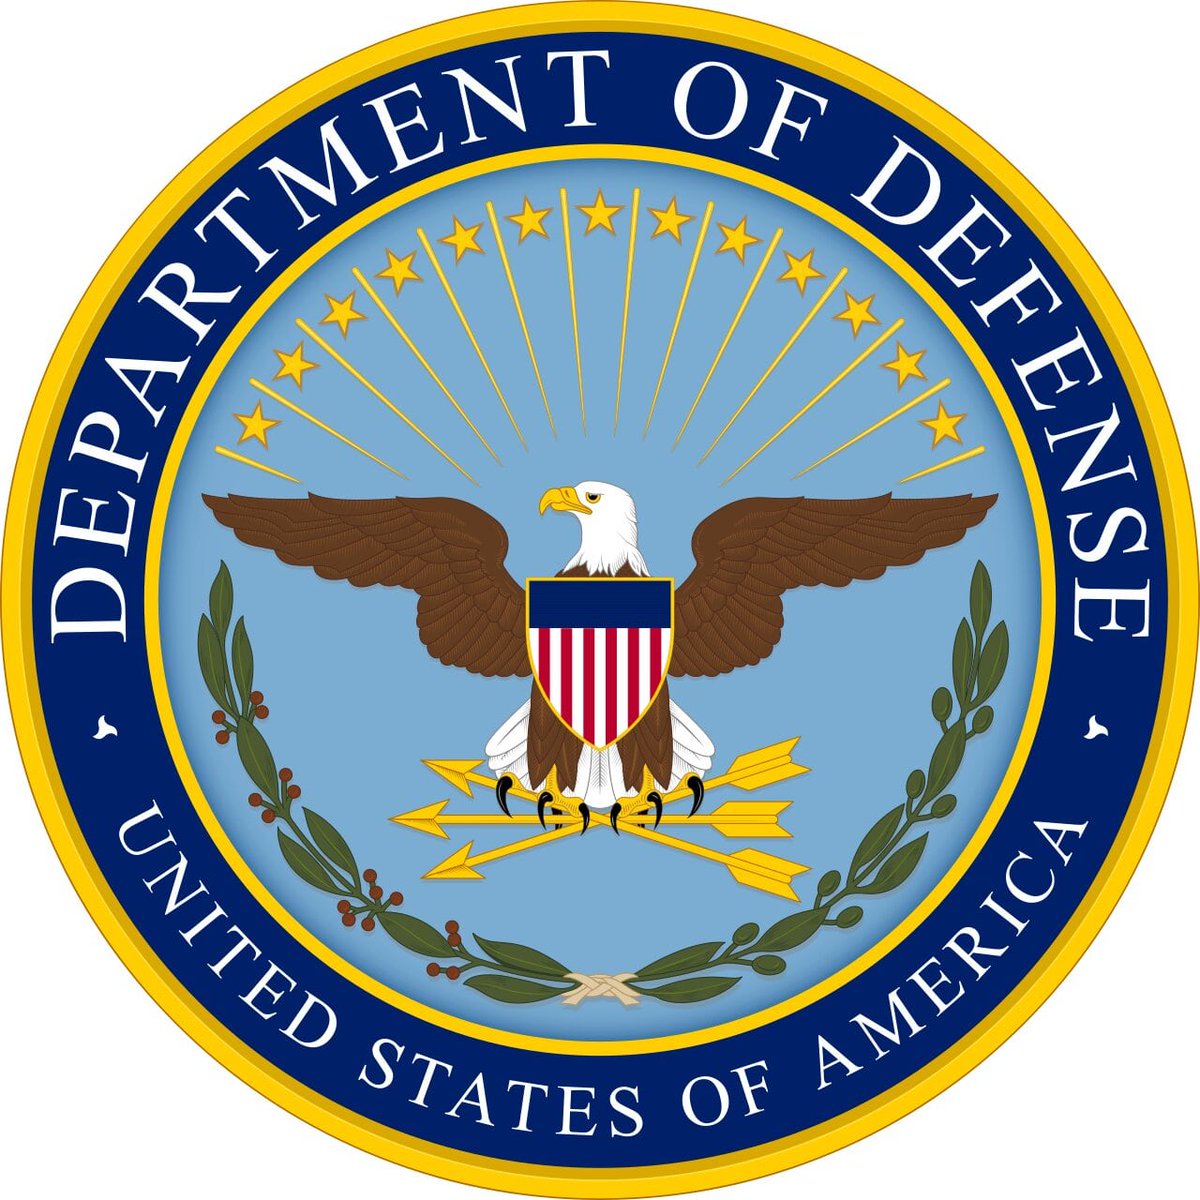 .@UofMaryland's CS Department joins a @DeptofDefense-selected team for the 2024 MURI program. @MTHajiaghayi & @FeiziSoheil are part of the team exploring 'Algorithms, Learning & Game Theory,' focusing on decision-making in multi-agent systems. Read more: go.umd.edu/MURI